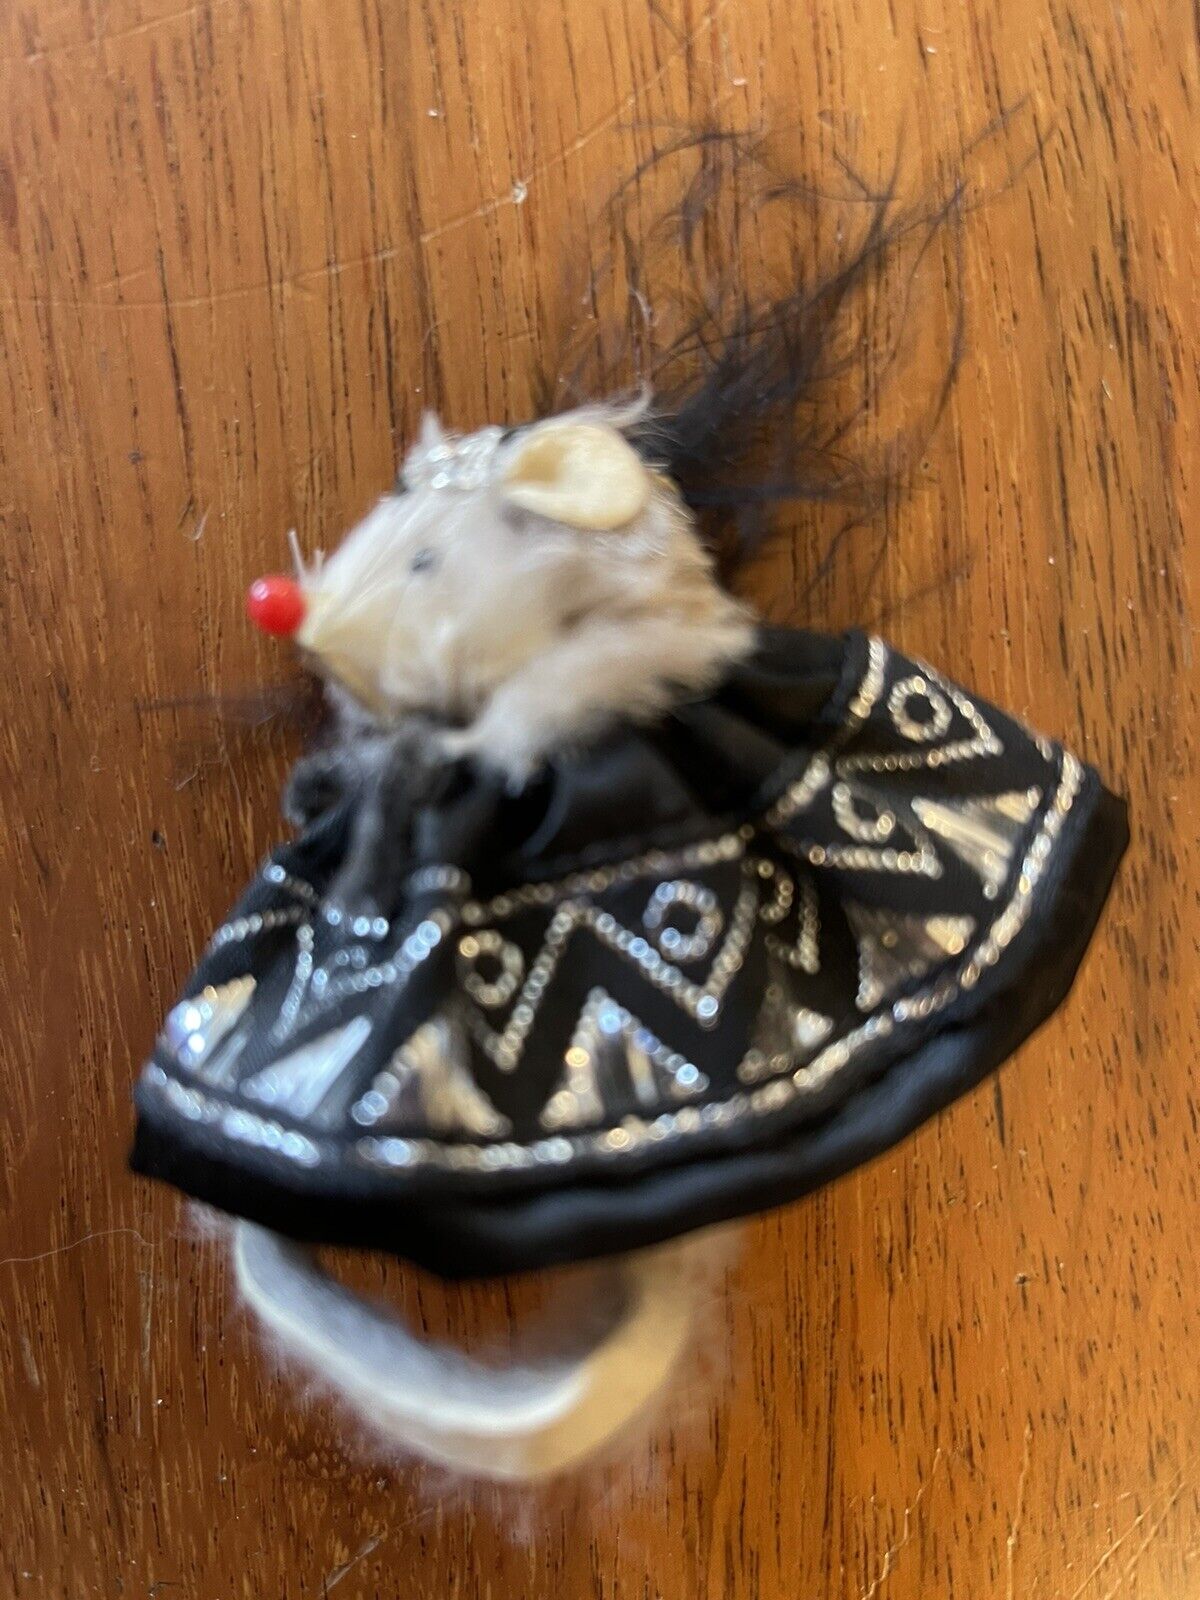 Real Fur Mouse Vintage 2” Feather Headdress Silvery Zig Zag W. Germany Toy